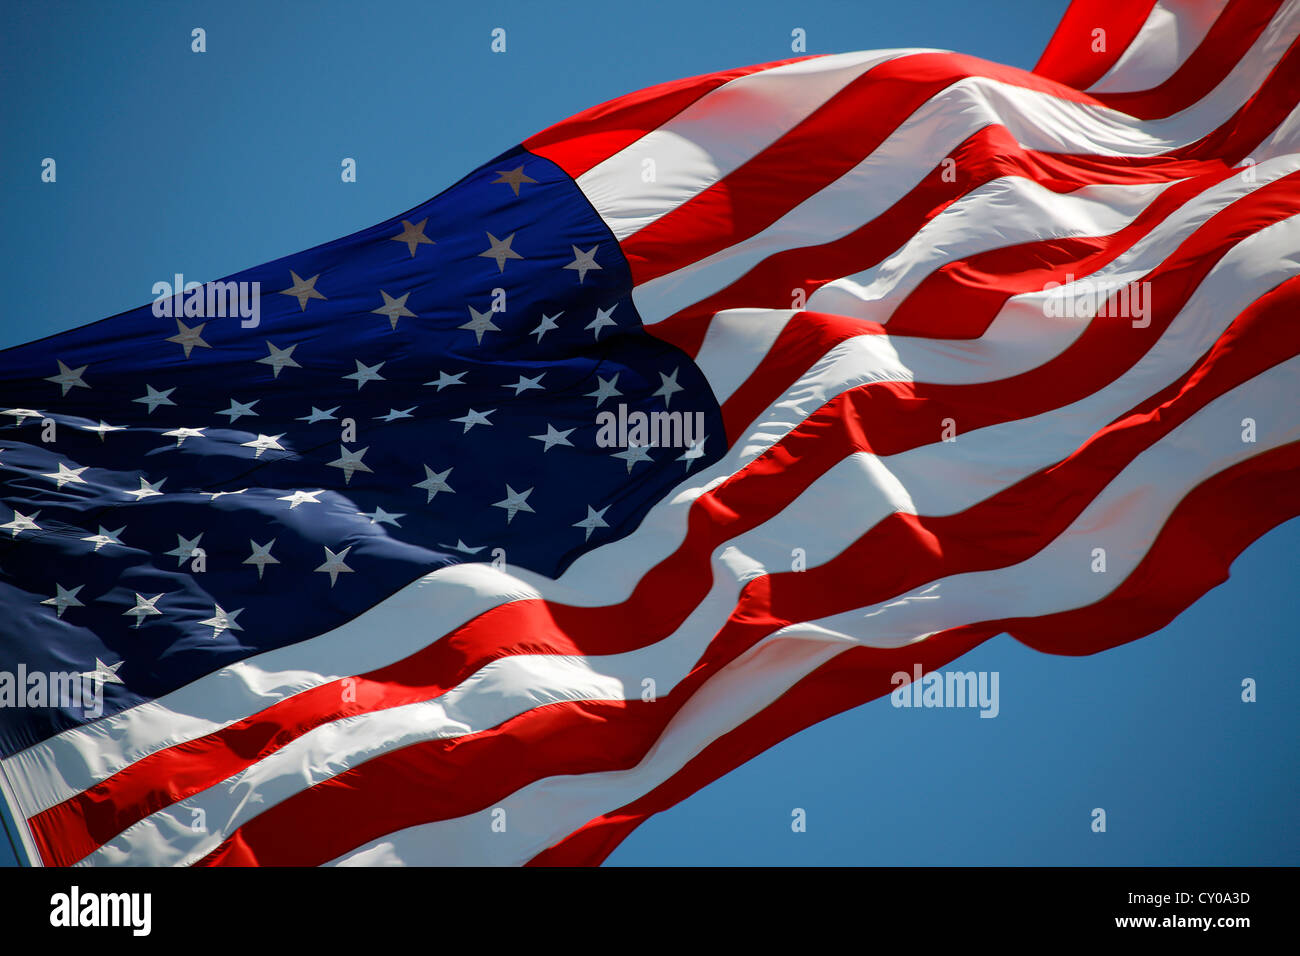 Waving American flag, Stars and Stripes, United States Stock Photo